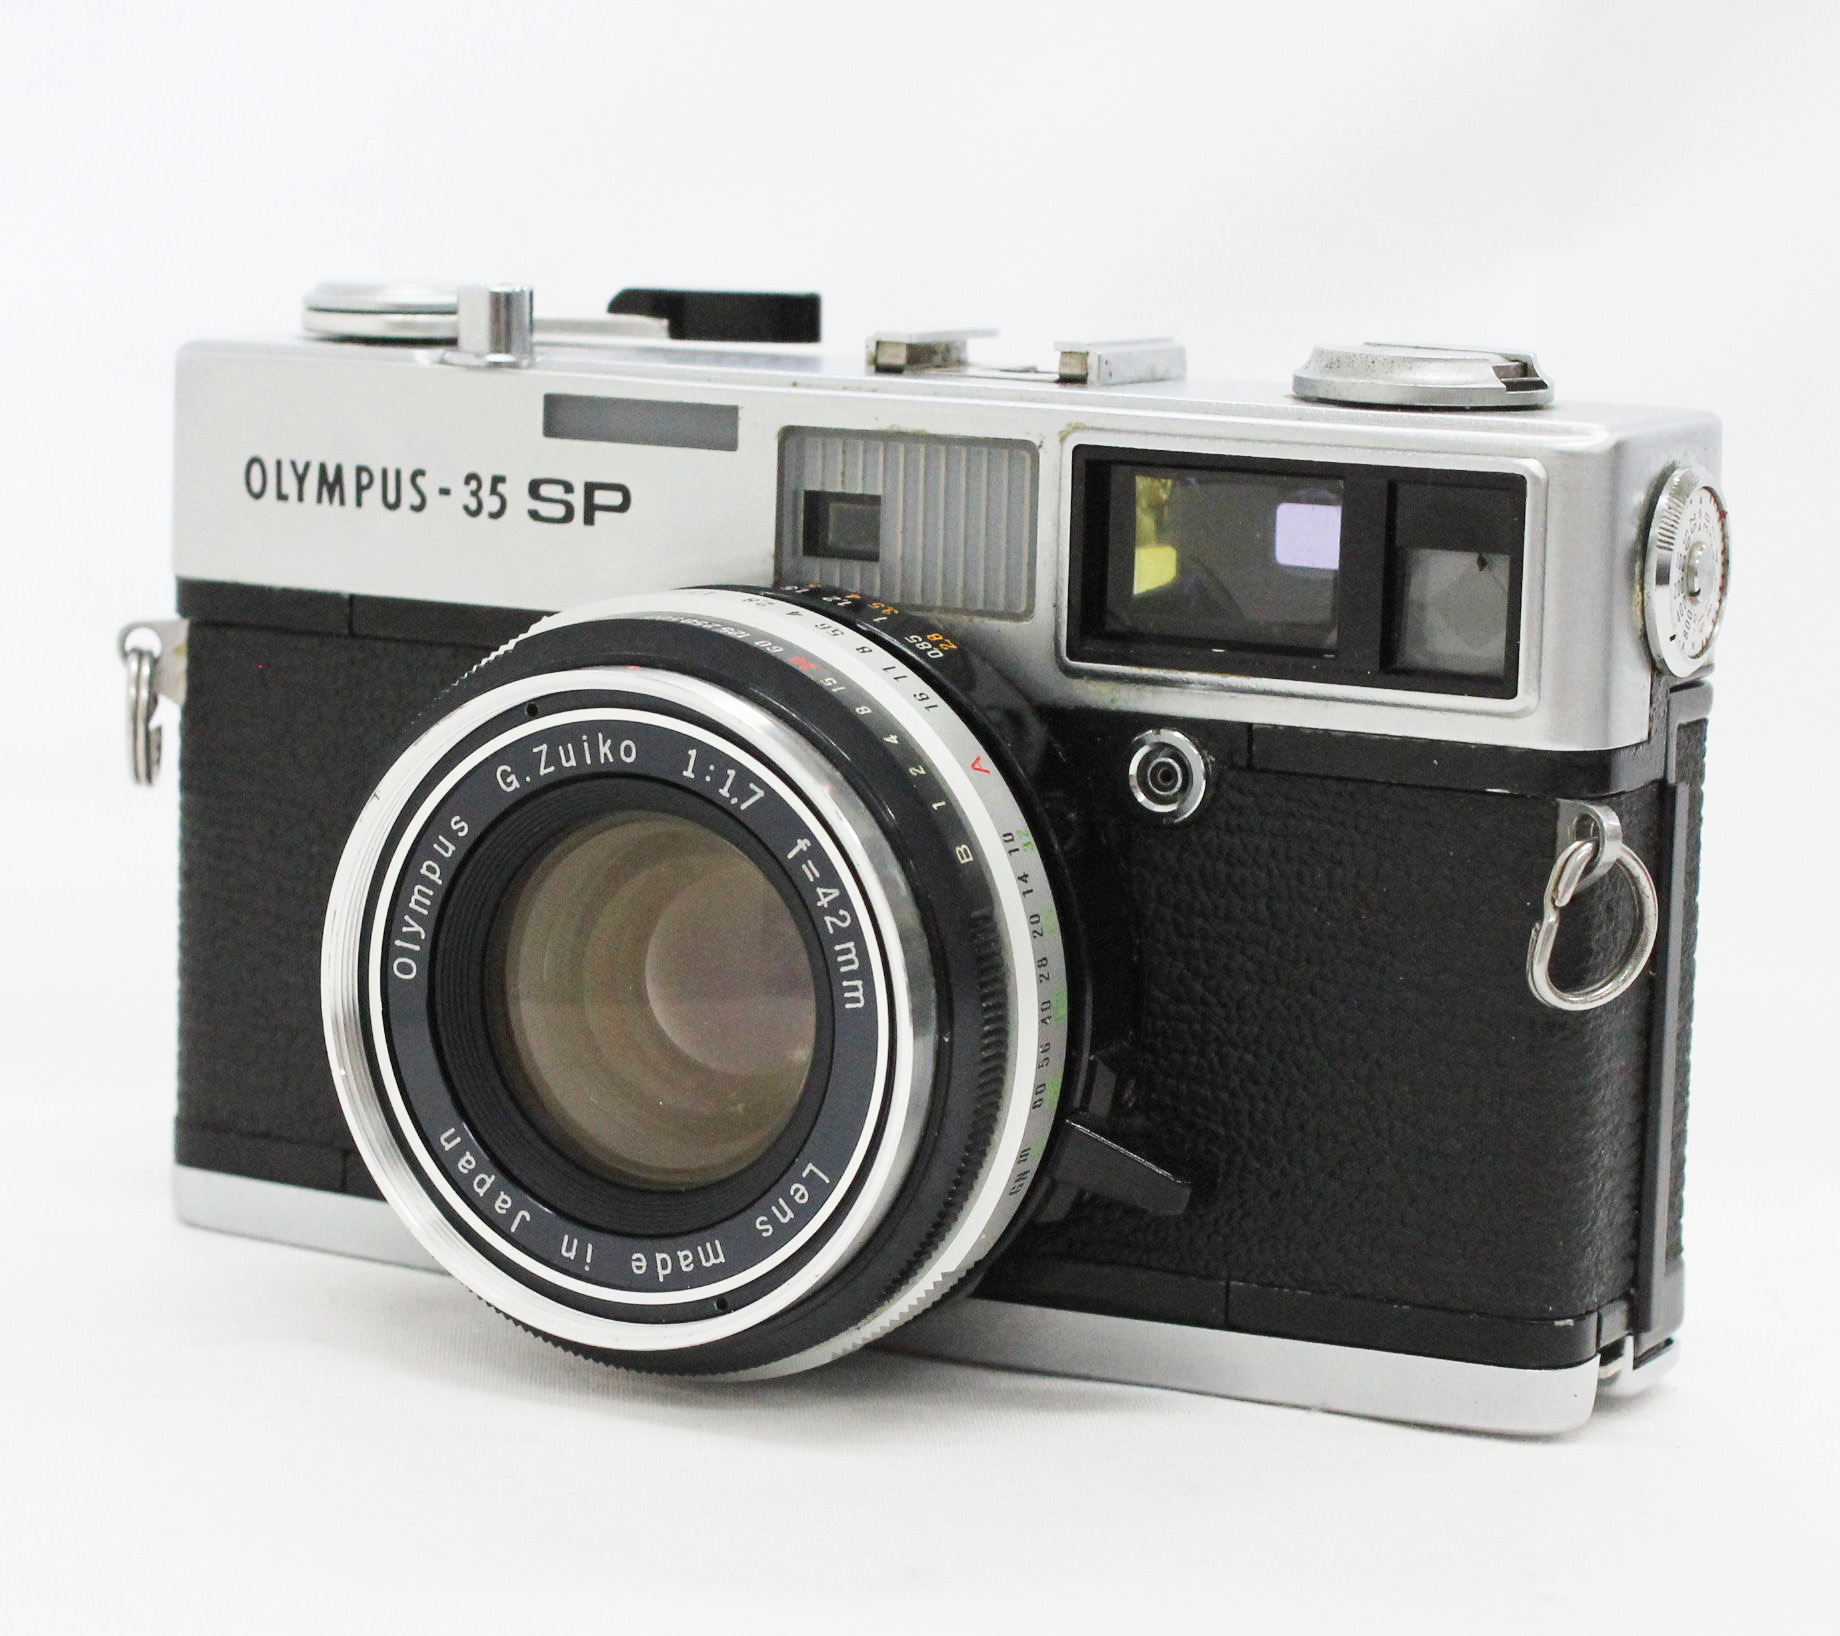 [Excellent++++] Olympus 35 SP 35mm Rangefinder Film Camera with G.Zuiko 42mm F1.7 Lens from Japan